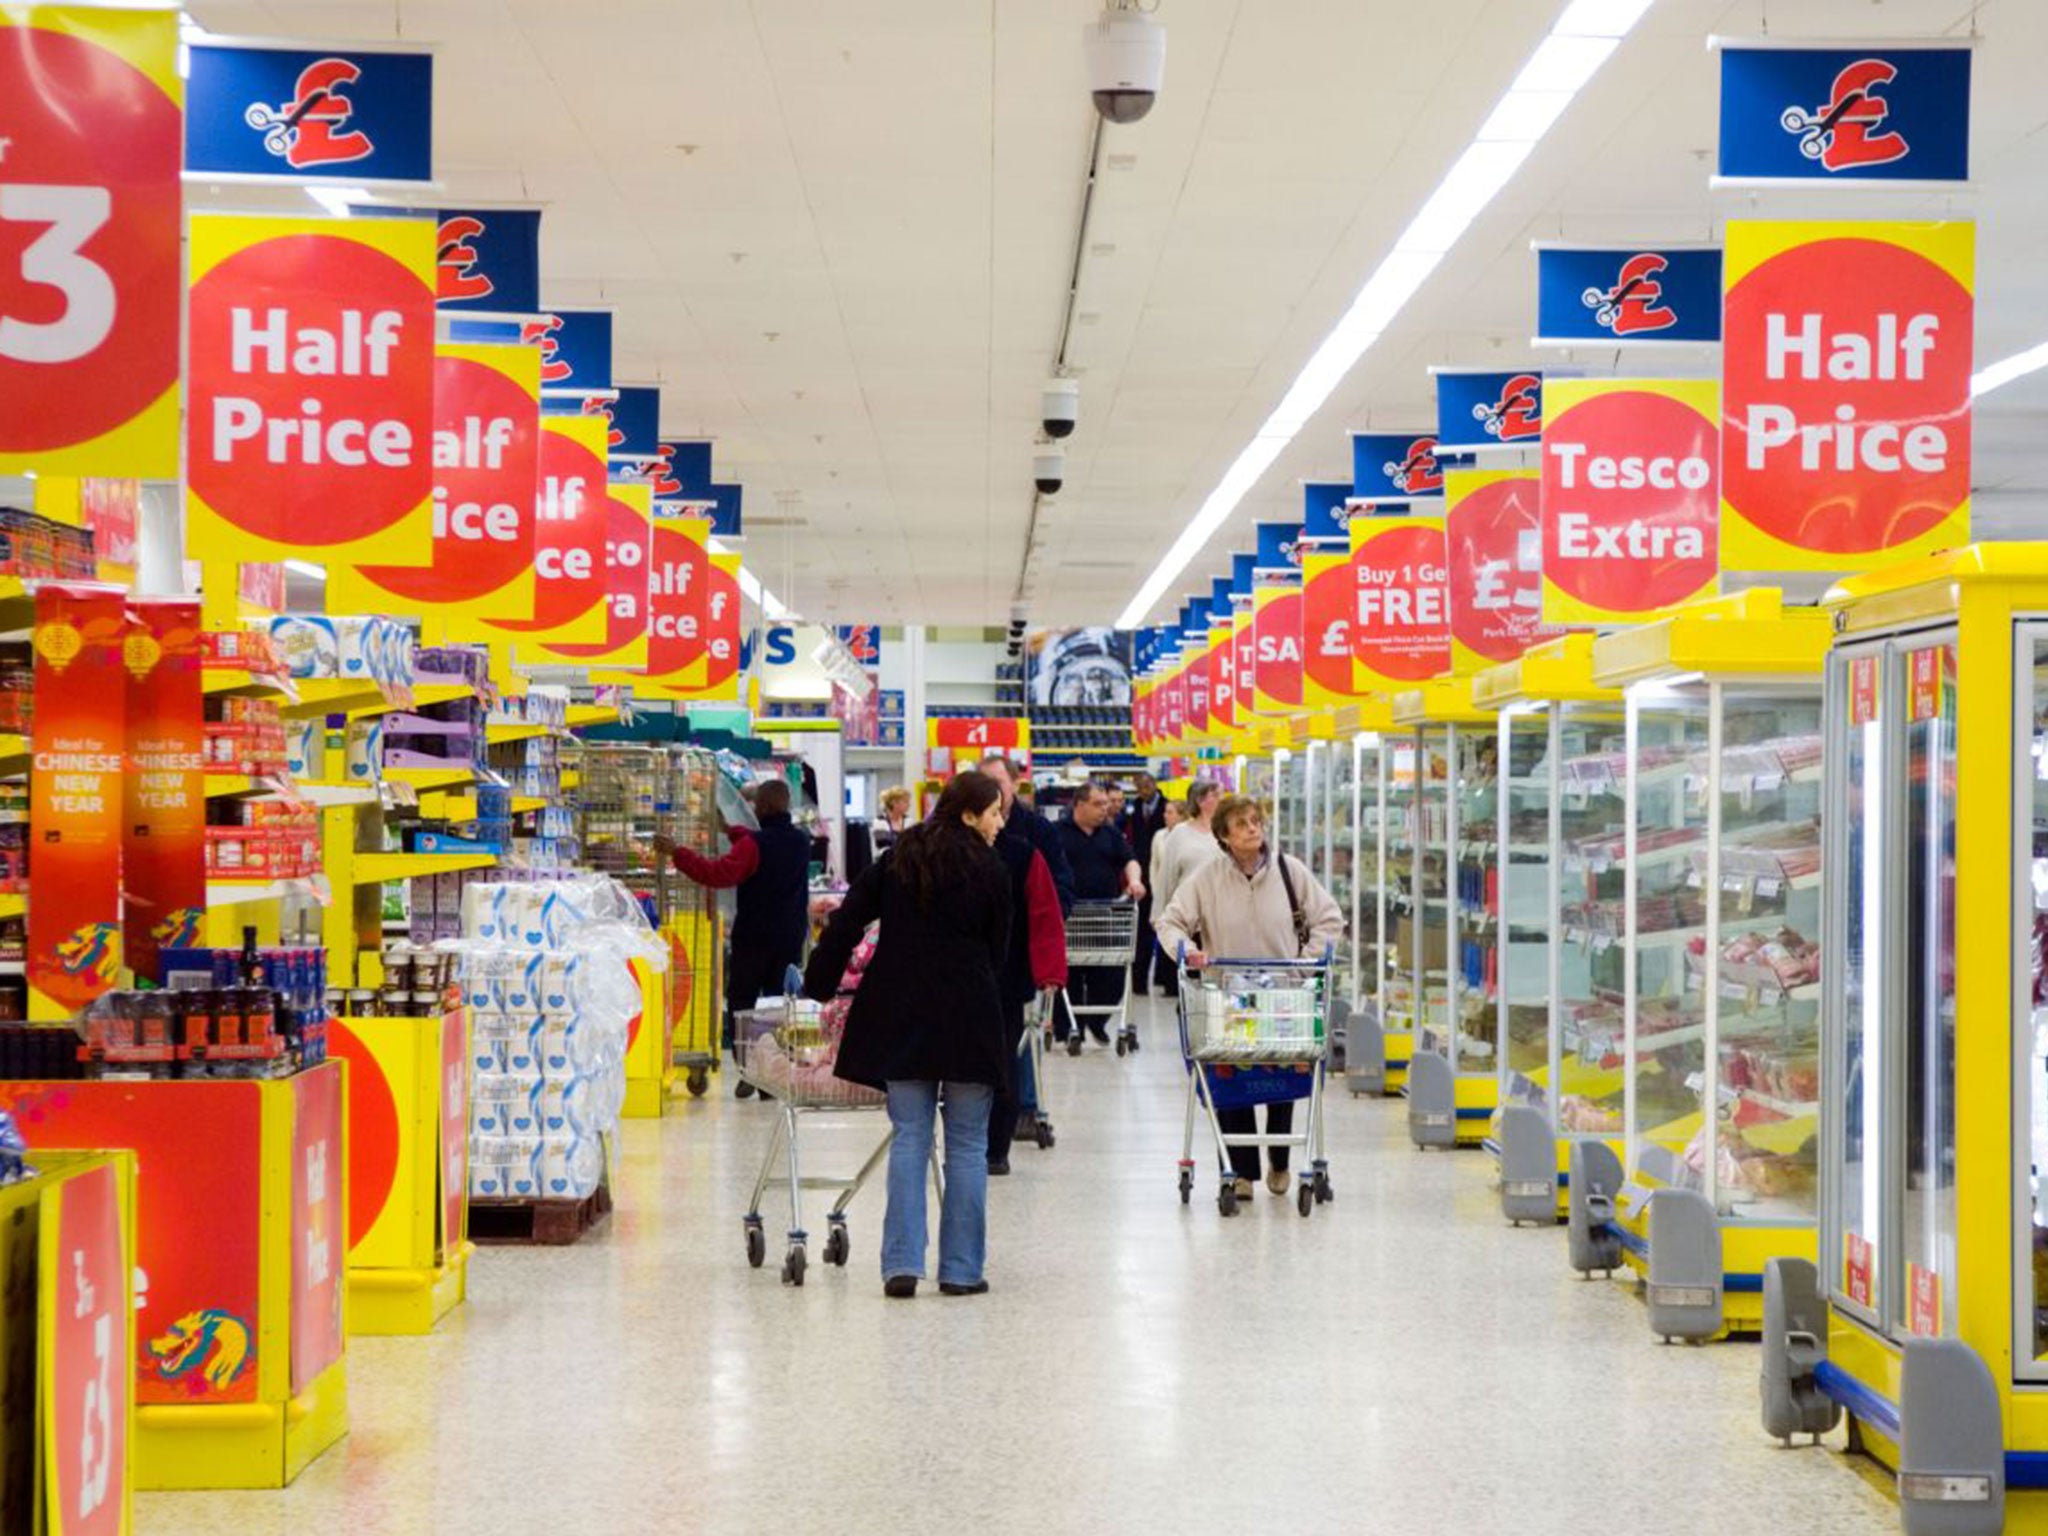 Tesco has been battling with falling sales in the face of competition from Aldi and Lidl